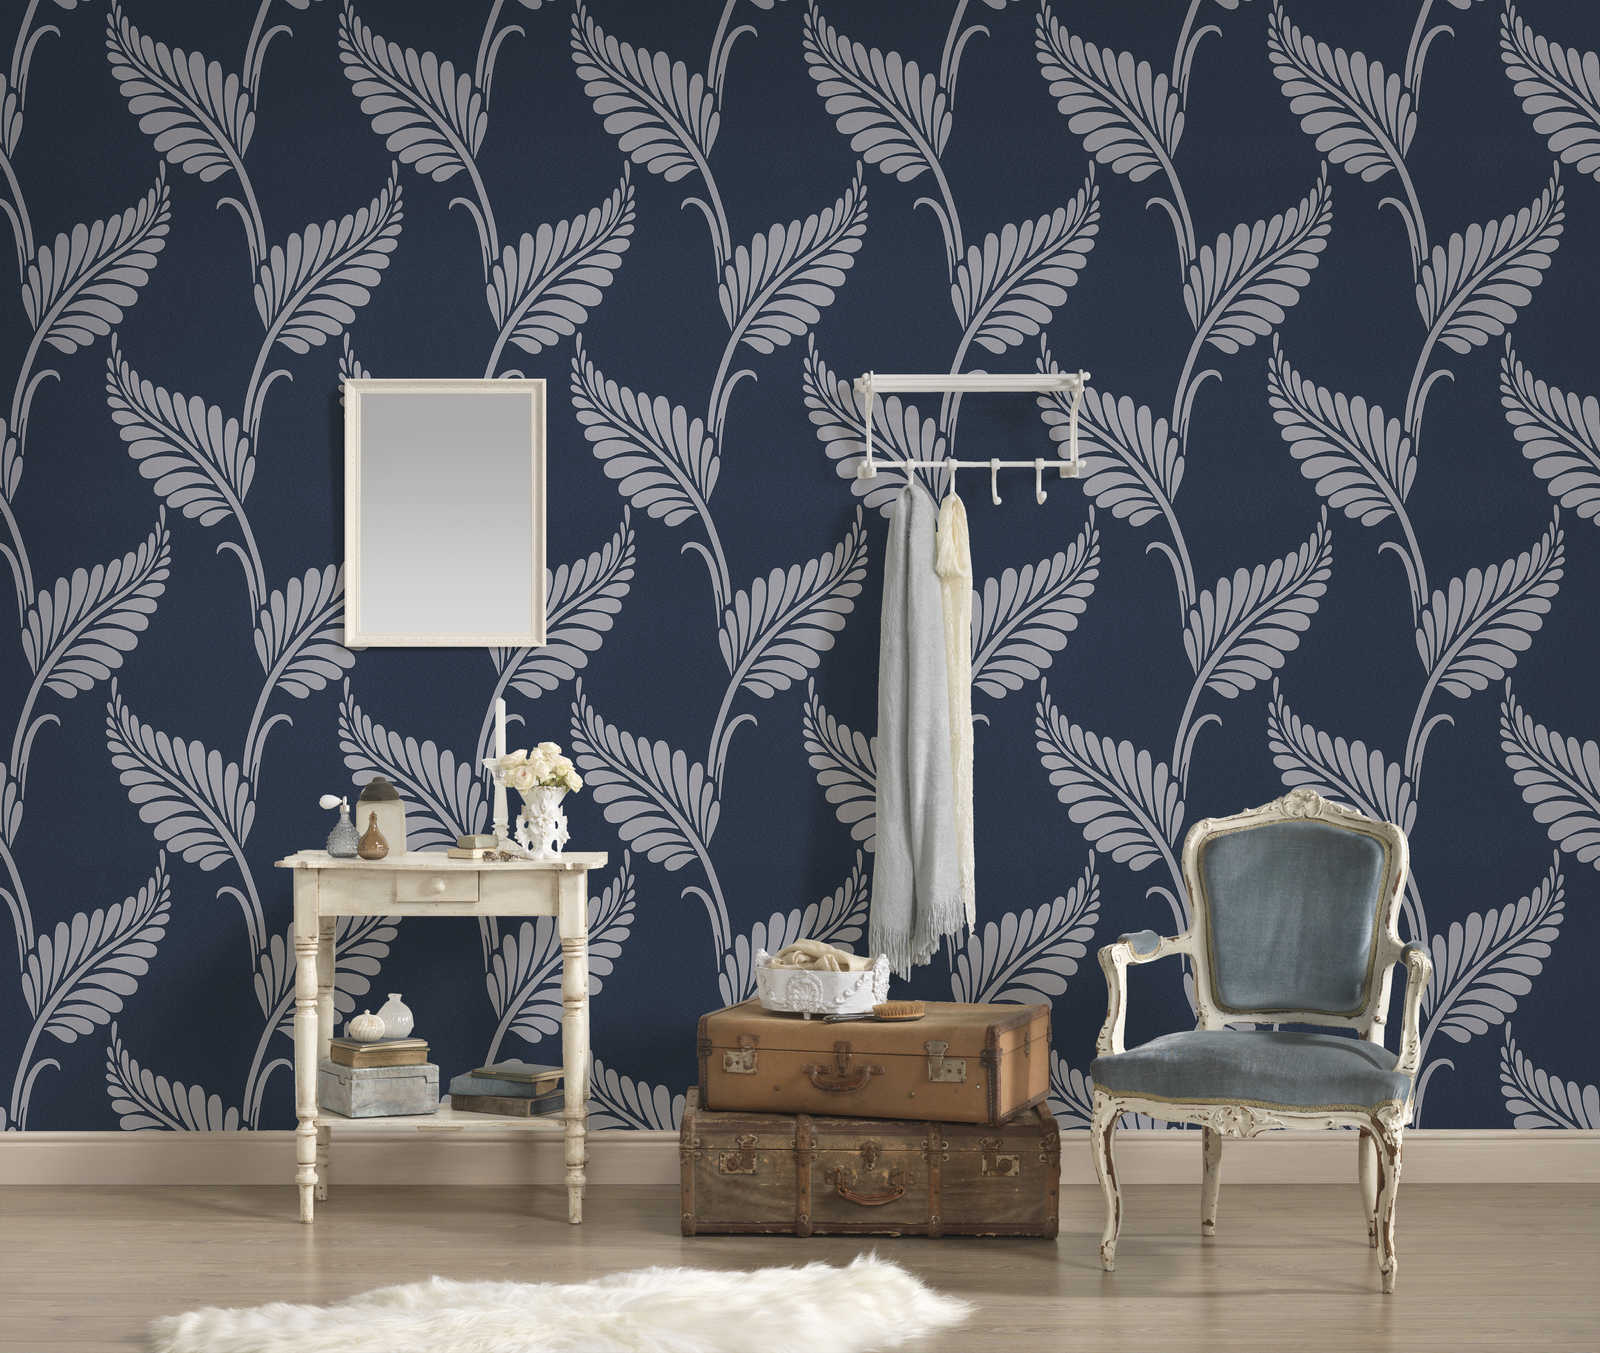             Floral paper wallpaper glossy with leaves - blue, silver
        